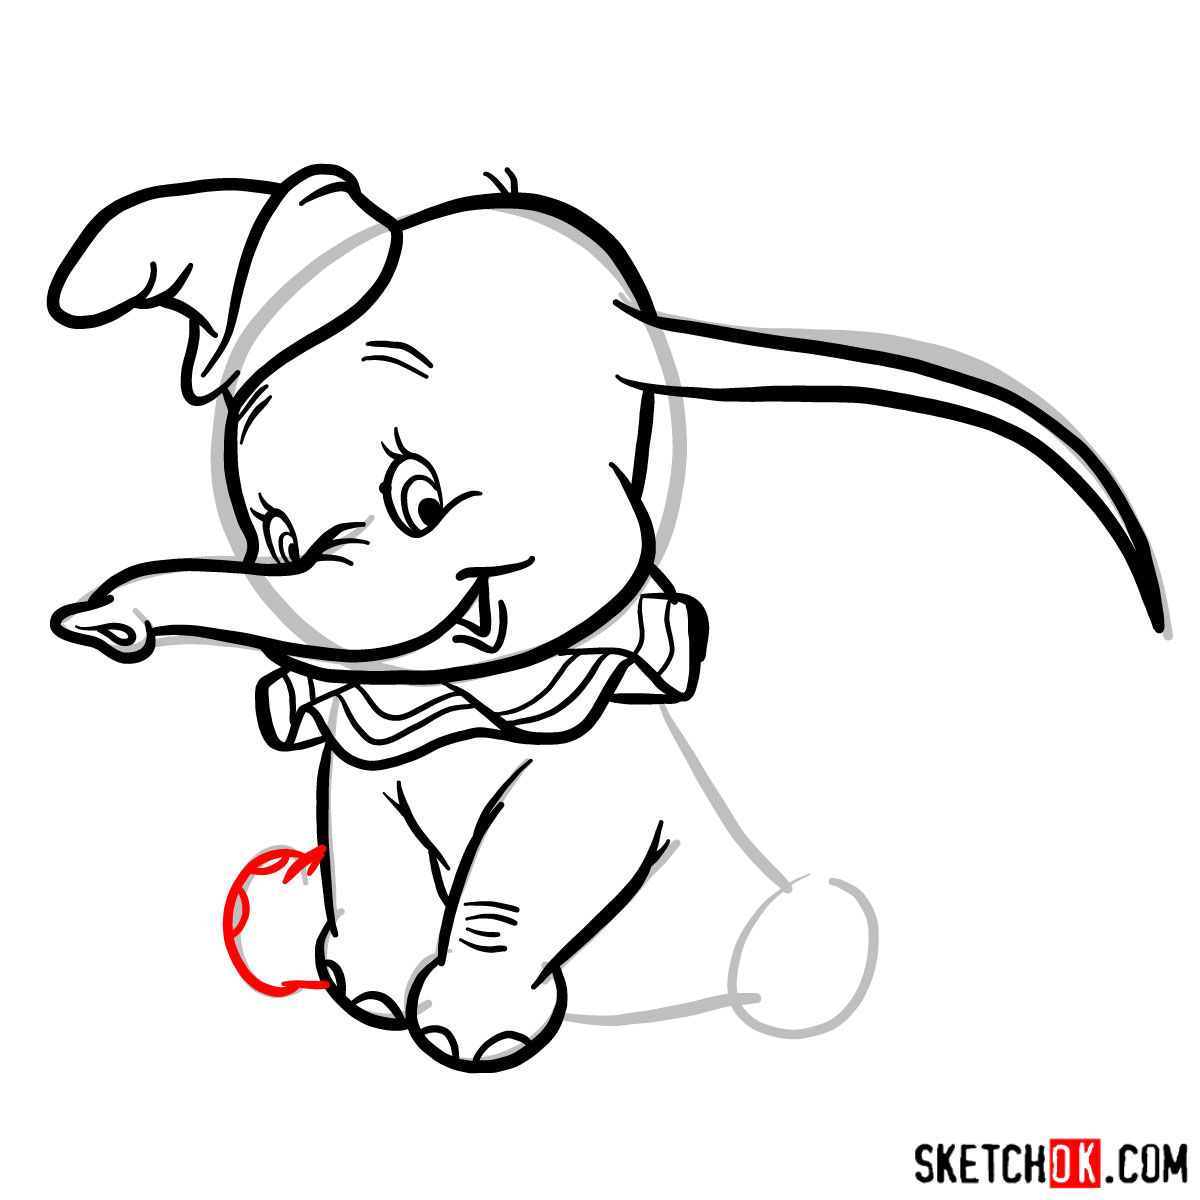 How to draw Dumbo the elephant - step 08